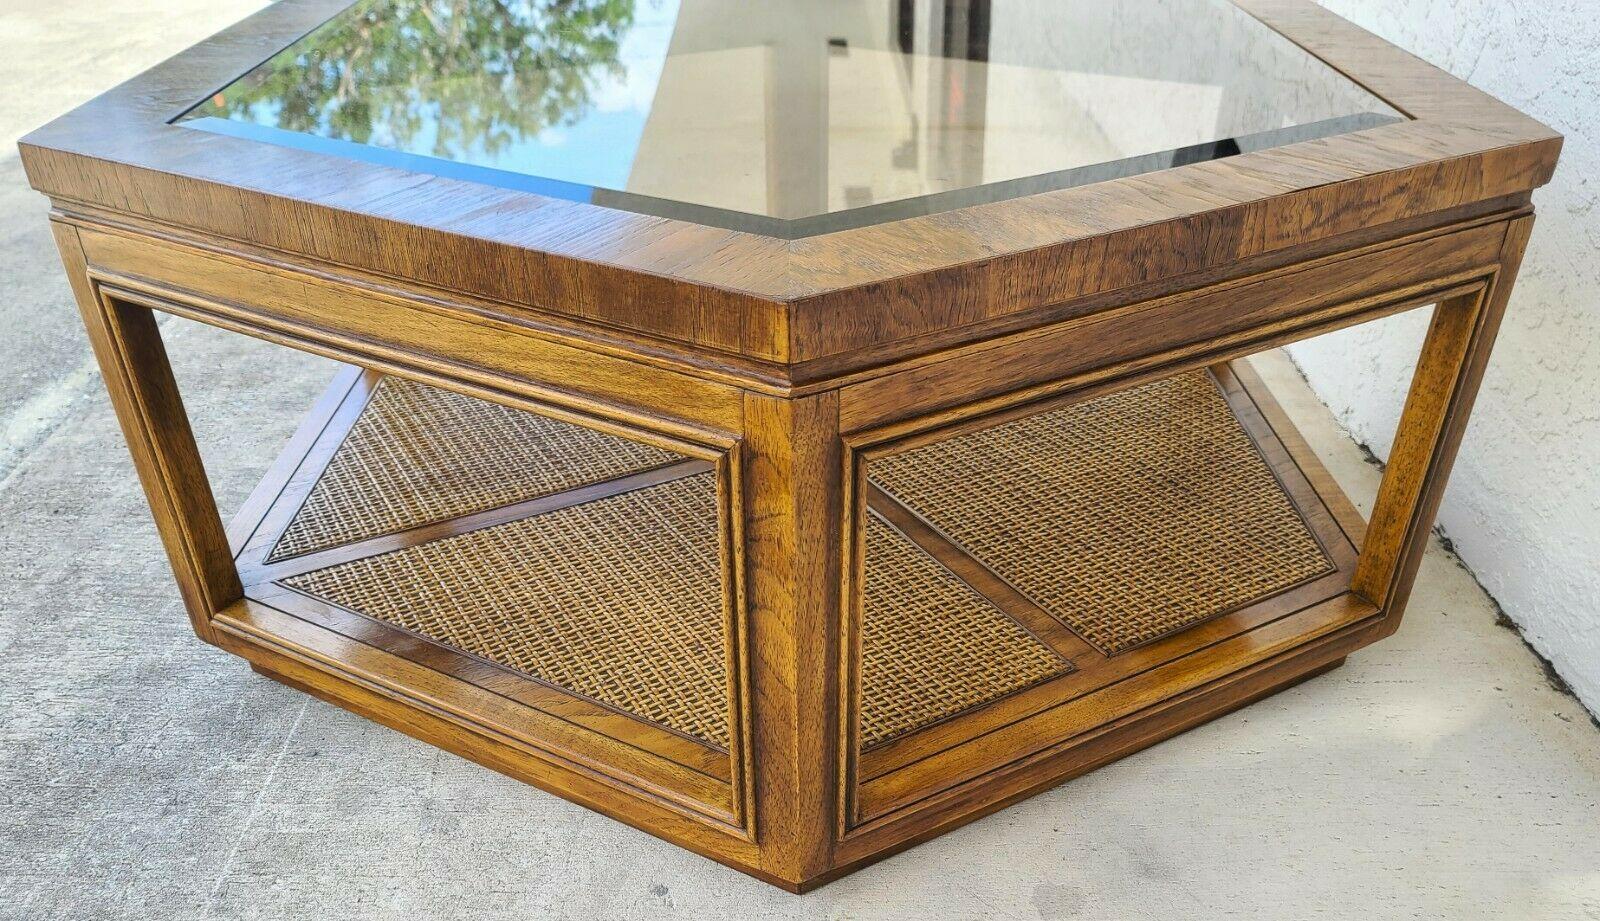 Vintage Accolade Hexagonal Glass Wicker Coffee Table by Drexel 1